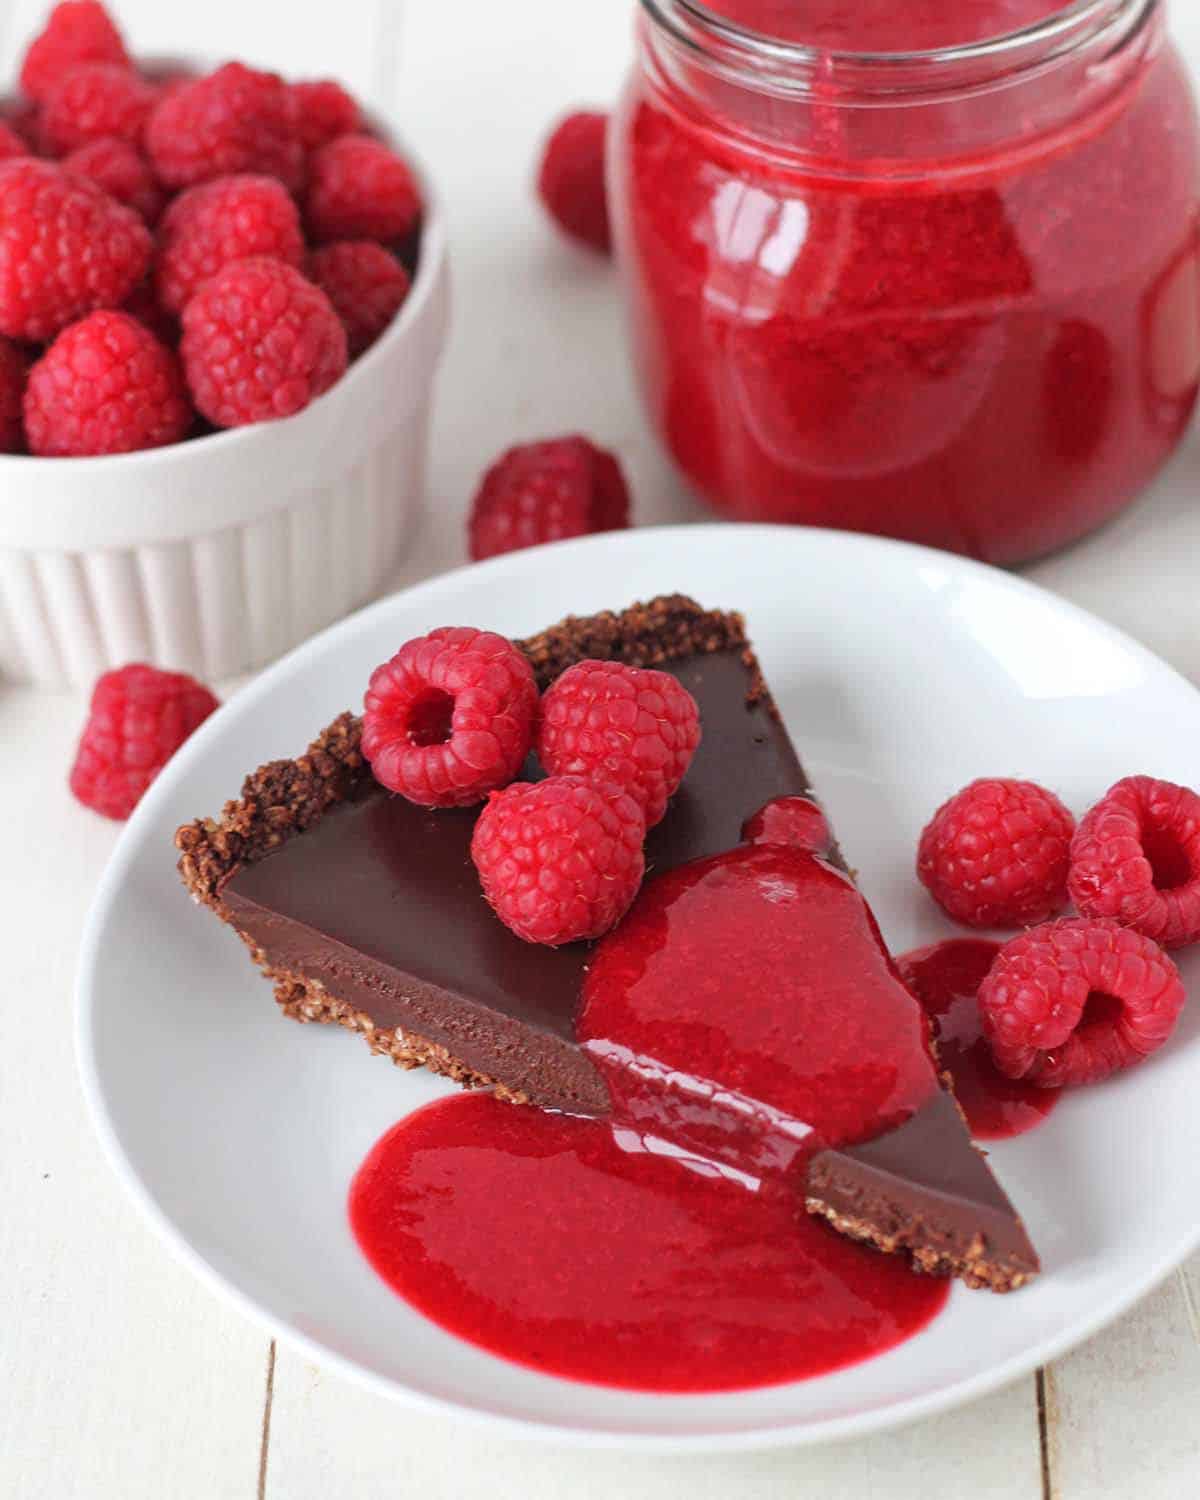 A slice of chocolate tart garnished with raspberry sauce on a white plate.